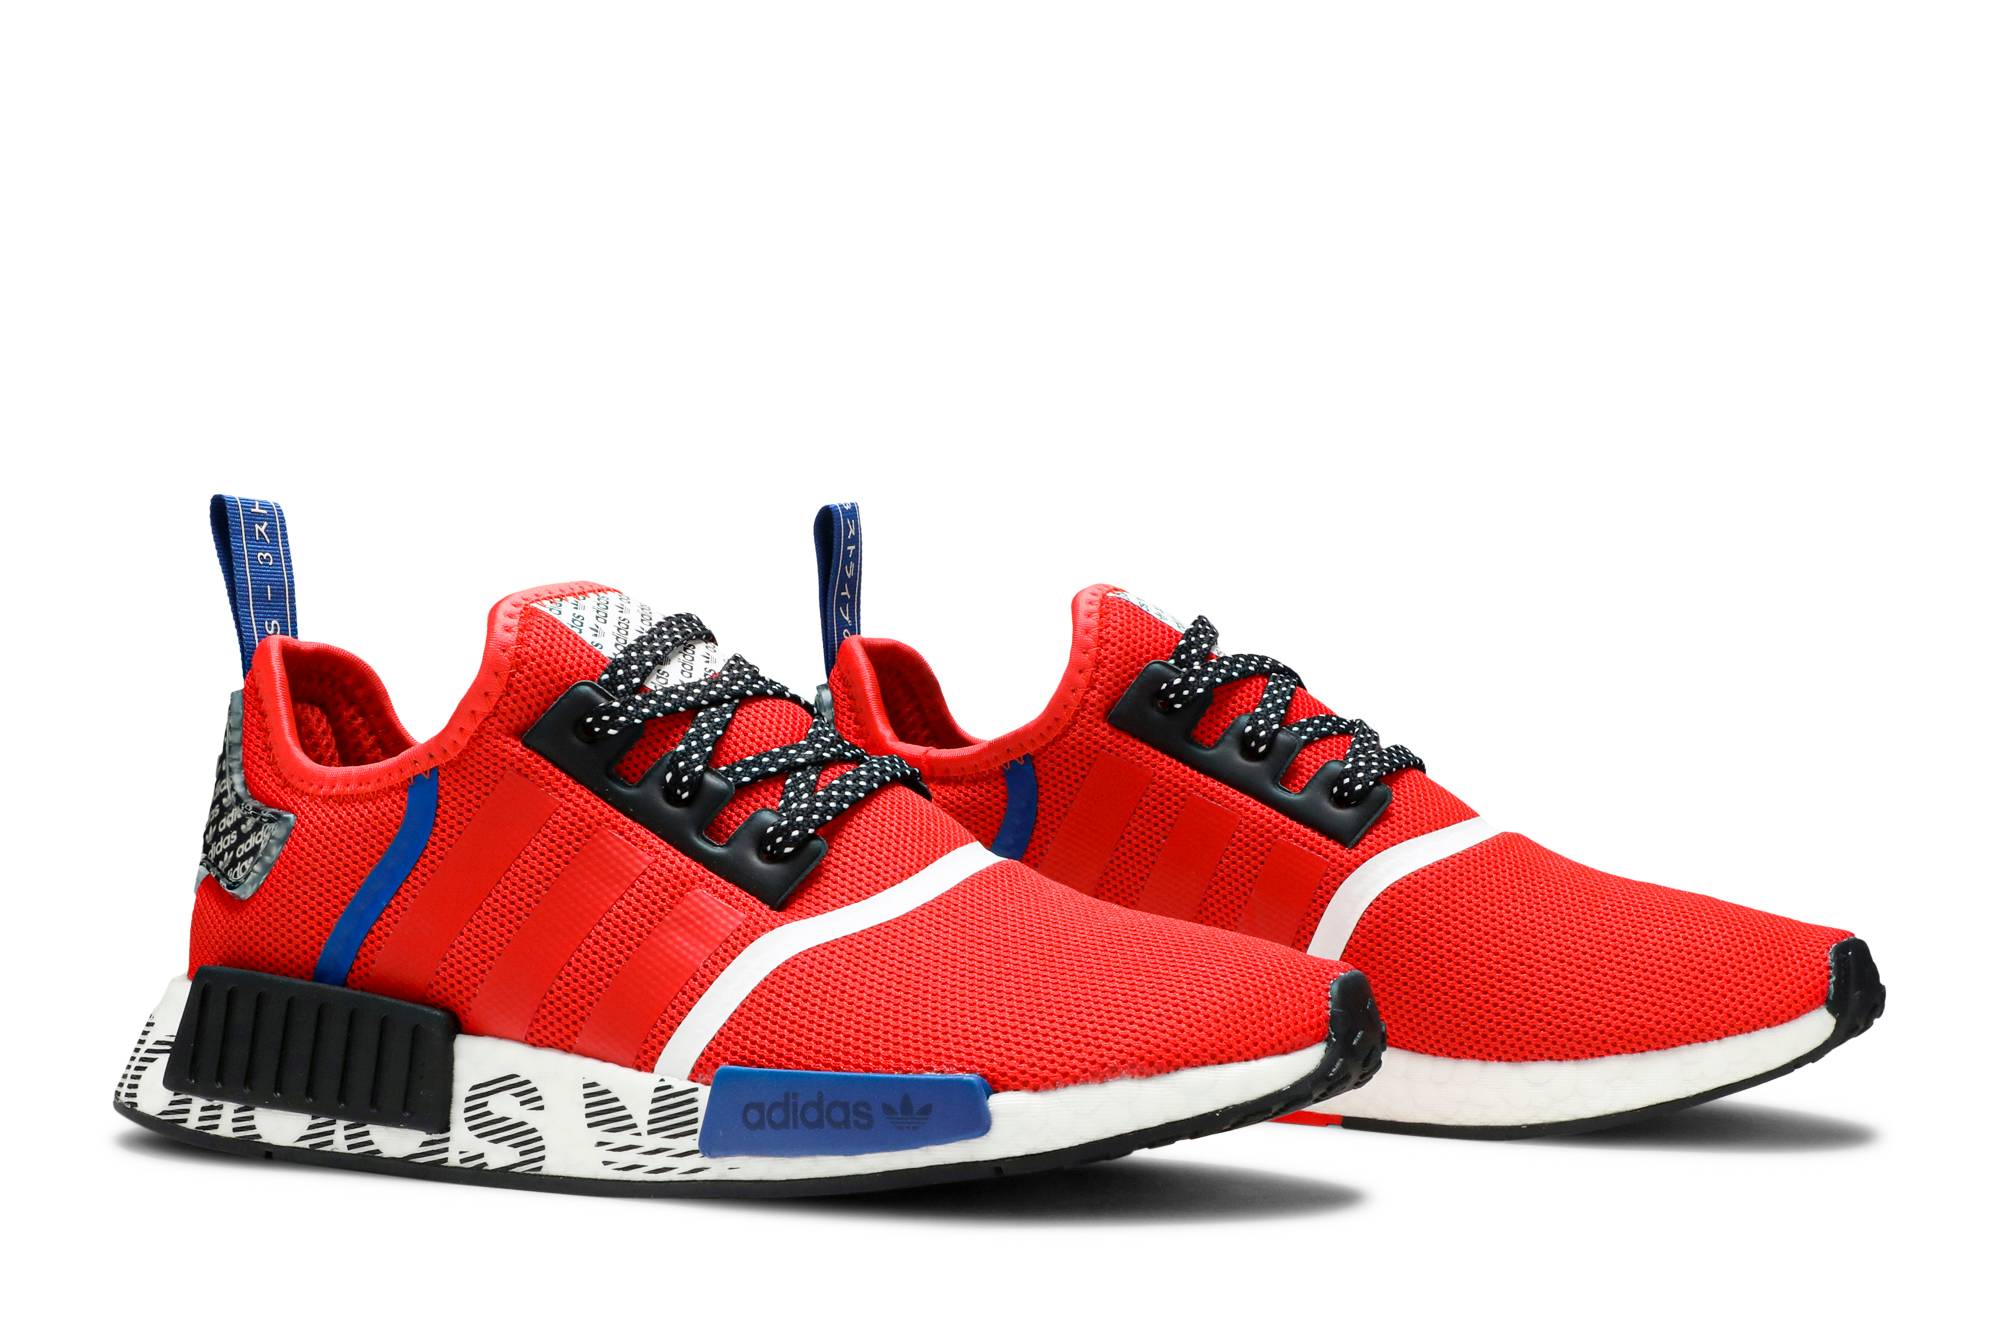 adidas NMD R1 'Active Red Black 